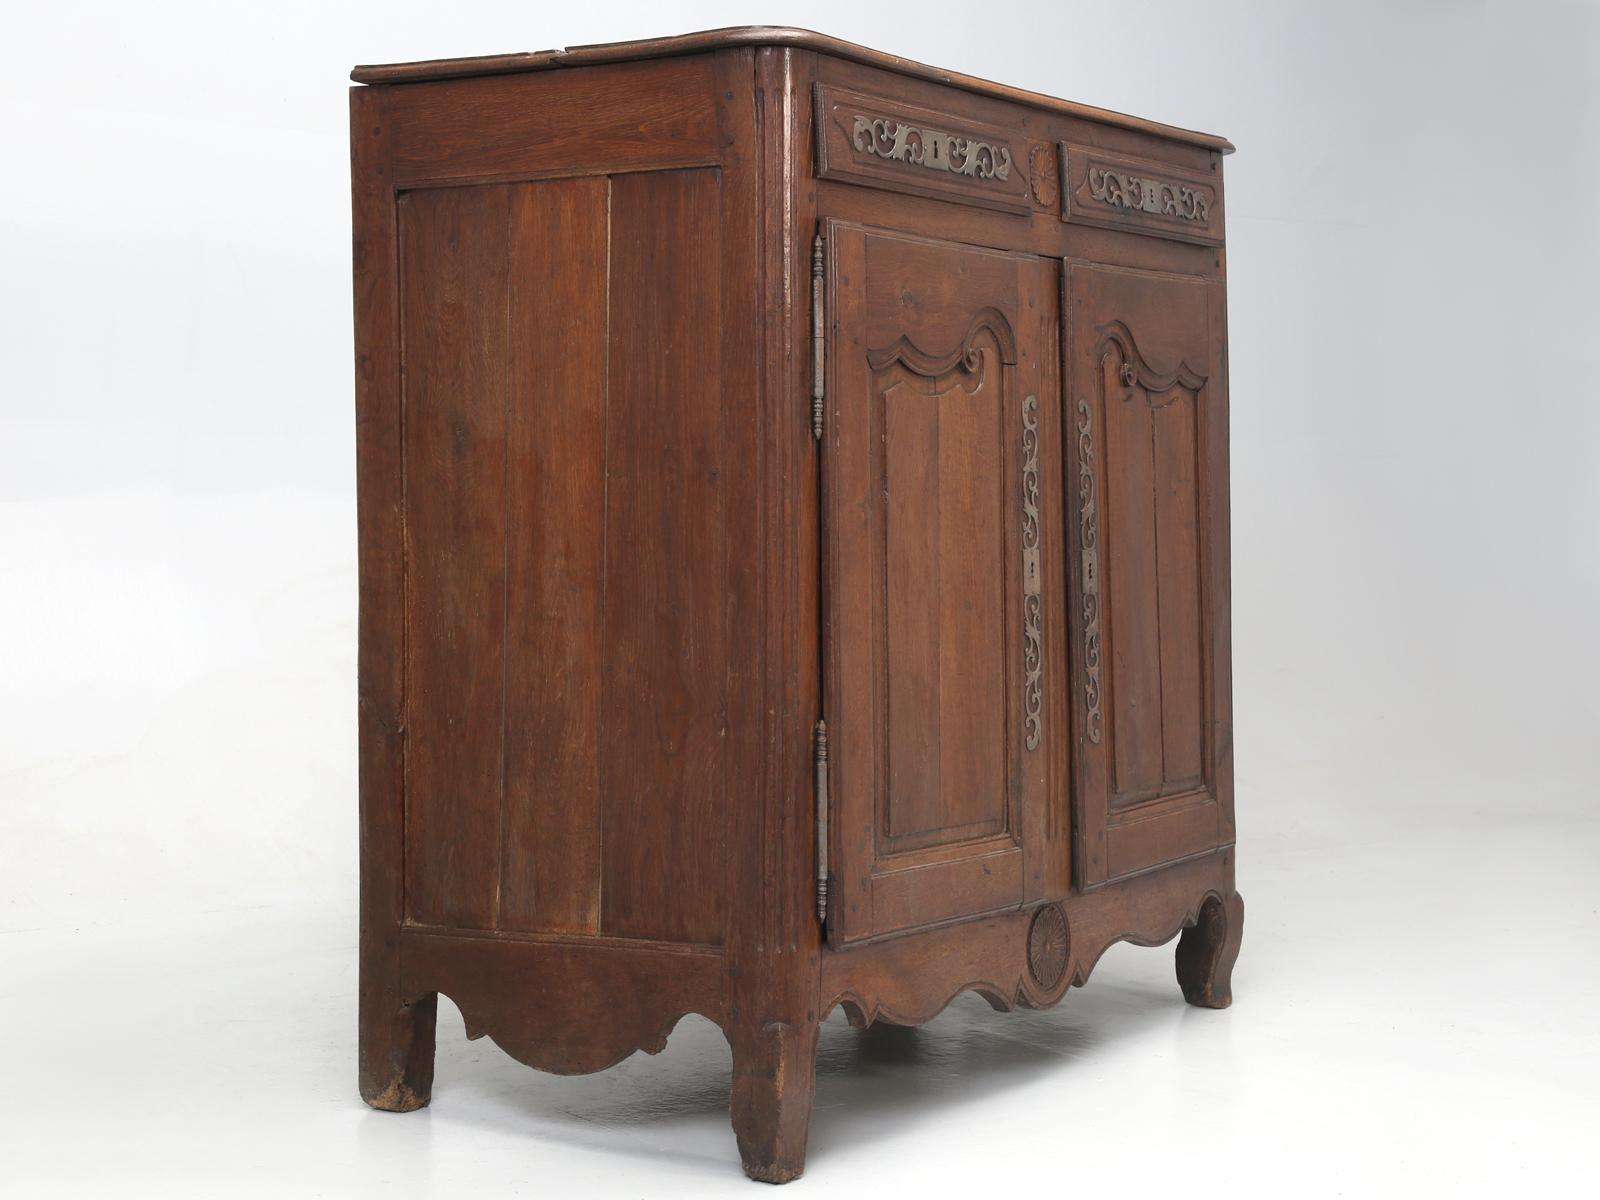 Antique French 2-door buffet, that was made about 200 years ago from French white oak. We are offering the buffet, in as found condition and it does require some restoration. This particular antique French buffet, is typical of the condition you